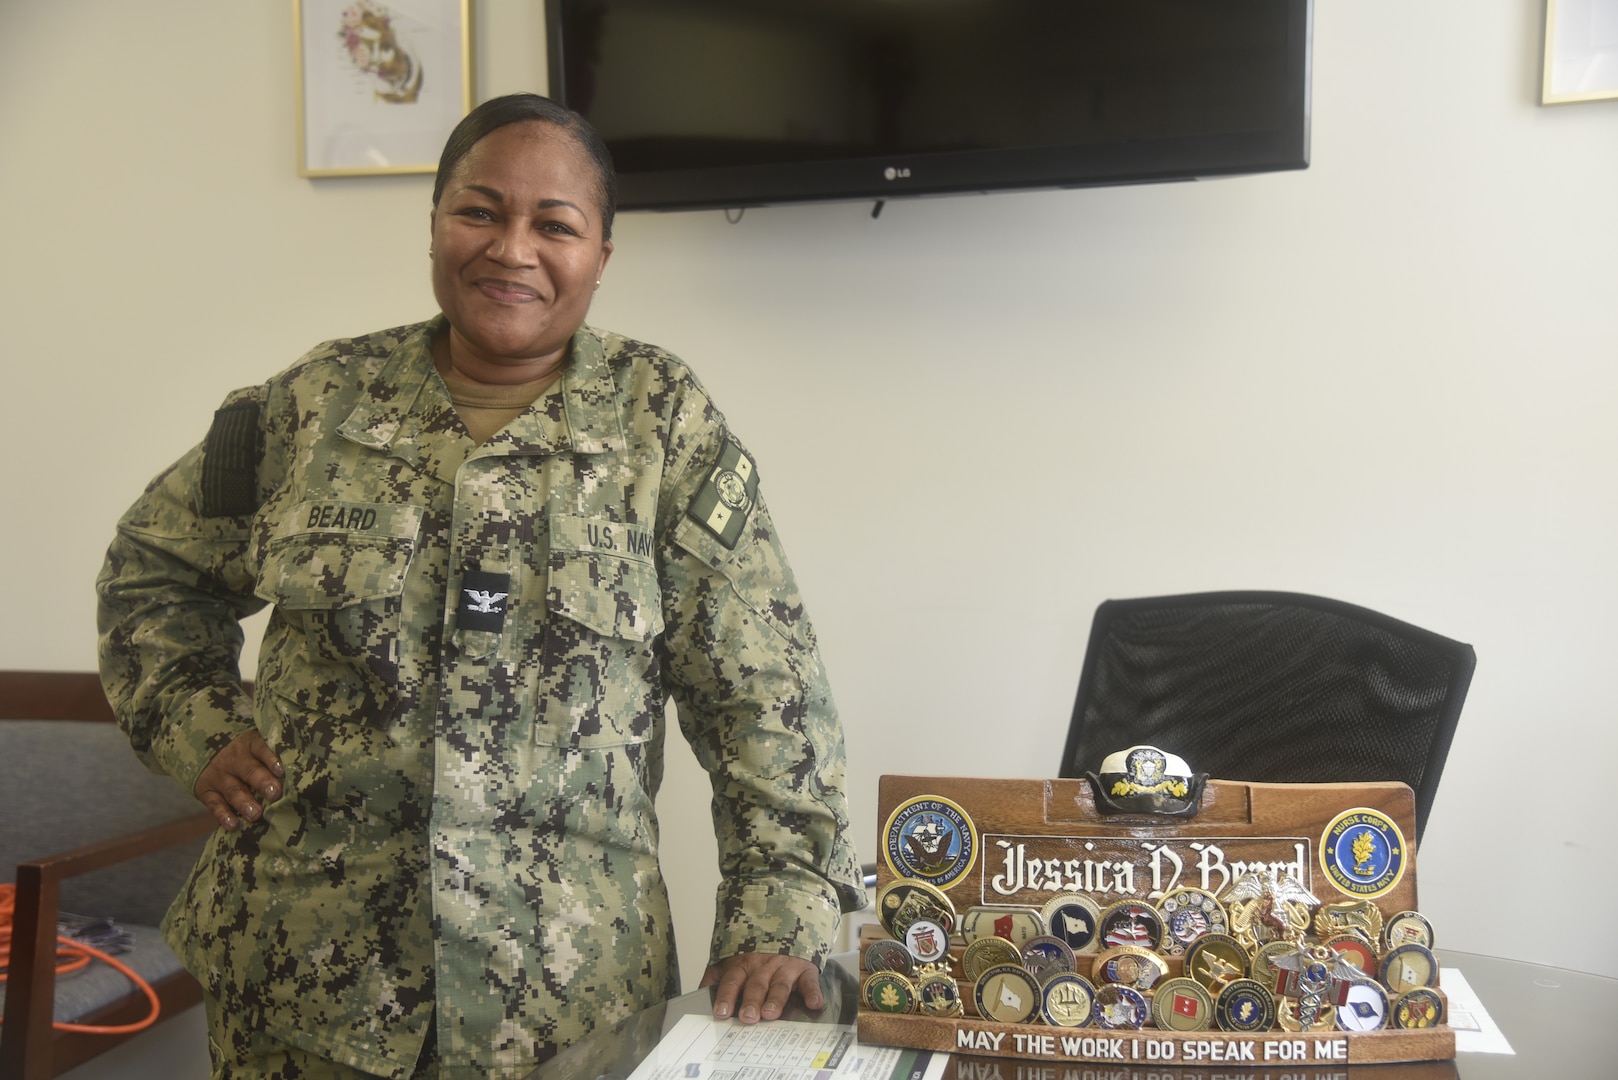 Capt. Jessica Beard, chief nursing officer of Walter Reed National Military Medical Center (WRNMMC), poses for a photo in her office at WRNMMC in Bethesda, Maryland, May, 3, 2022. Capt. Beard is celebrating the 2022 Nurses Week to highlight the importance of nurses in healthcare delivery.